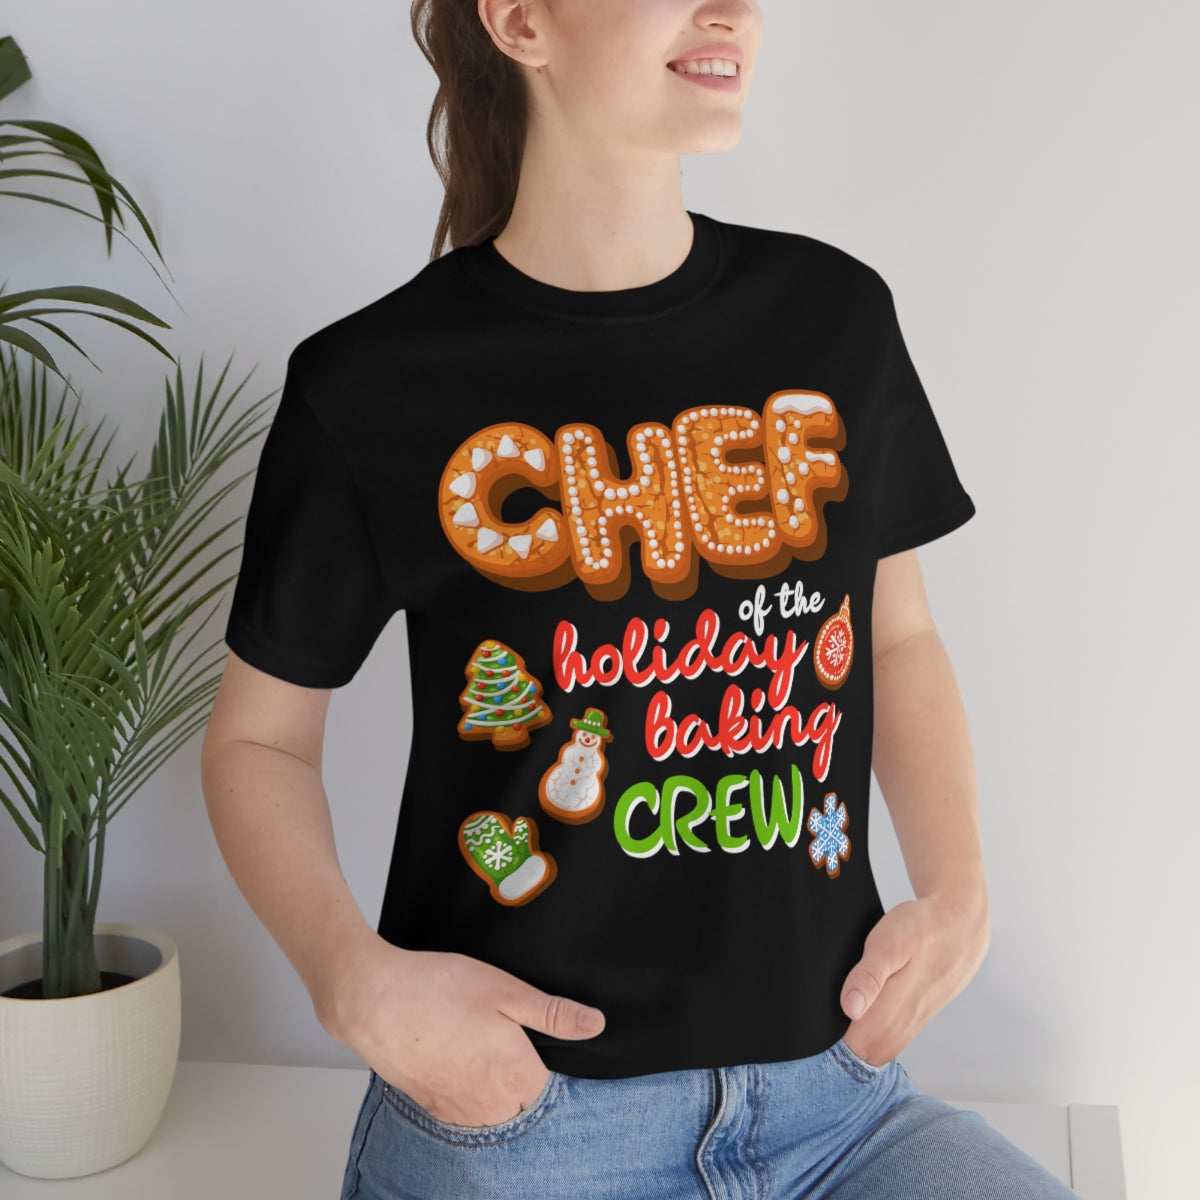 Chef of the holiday baking crew - Family Matching Funny Christmas T-shirts for women or men - 37 Design Unit